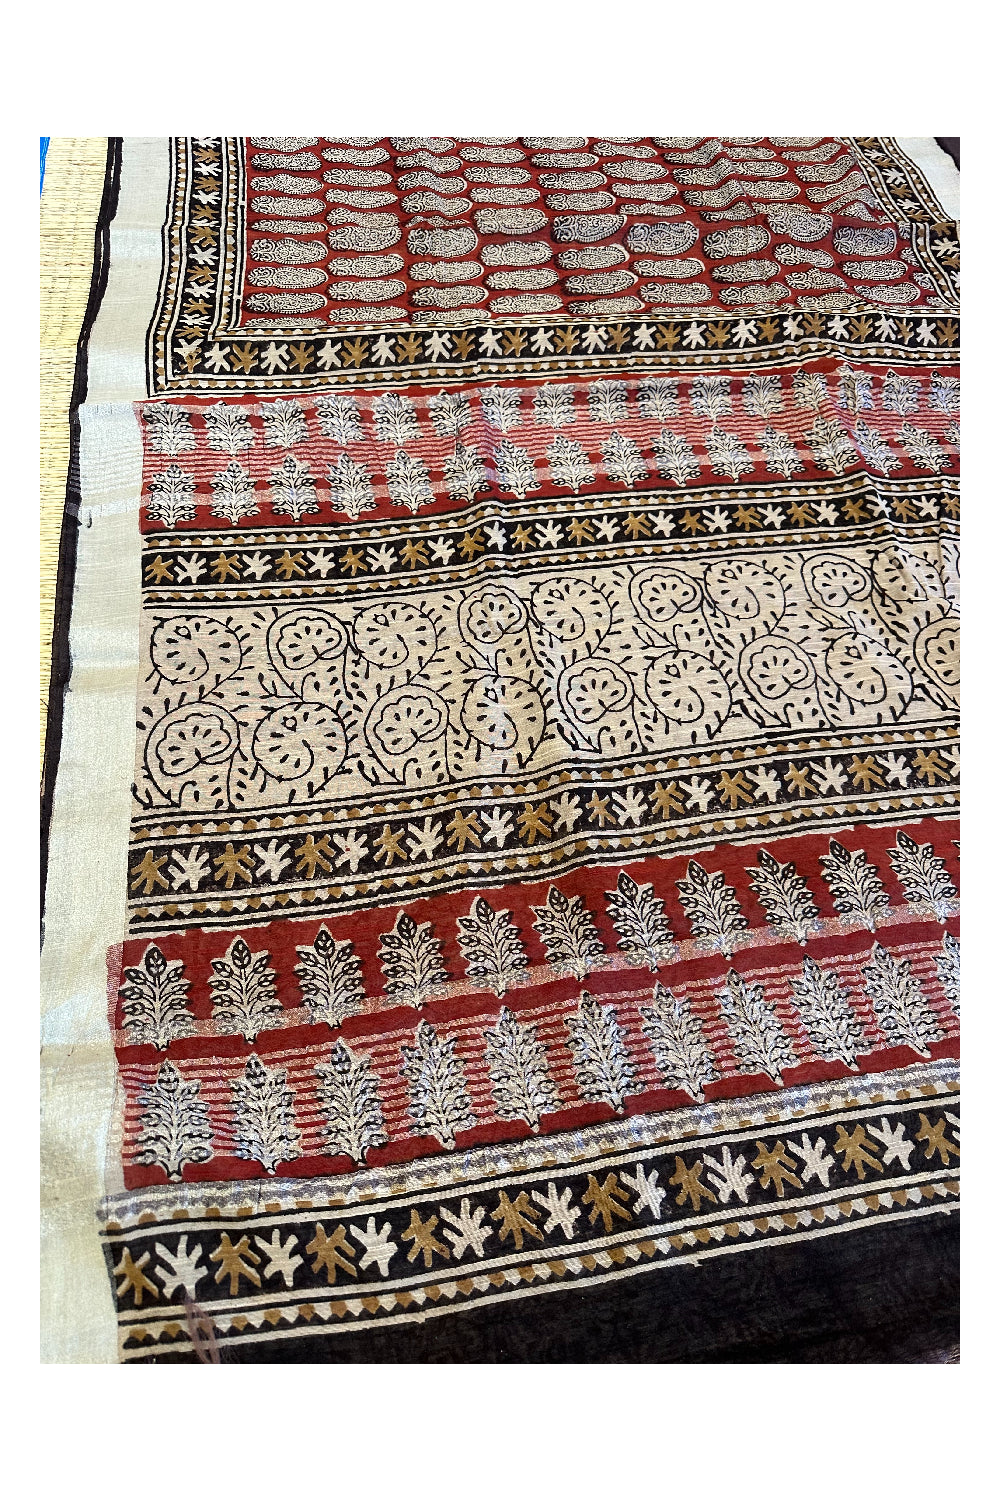 Southloom Linen Saree with Jaipur Hand Block Prints Across Body (Printed Blouse)